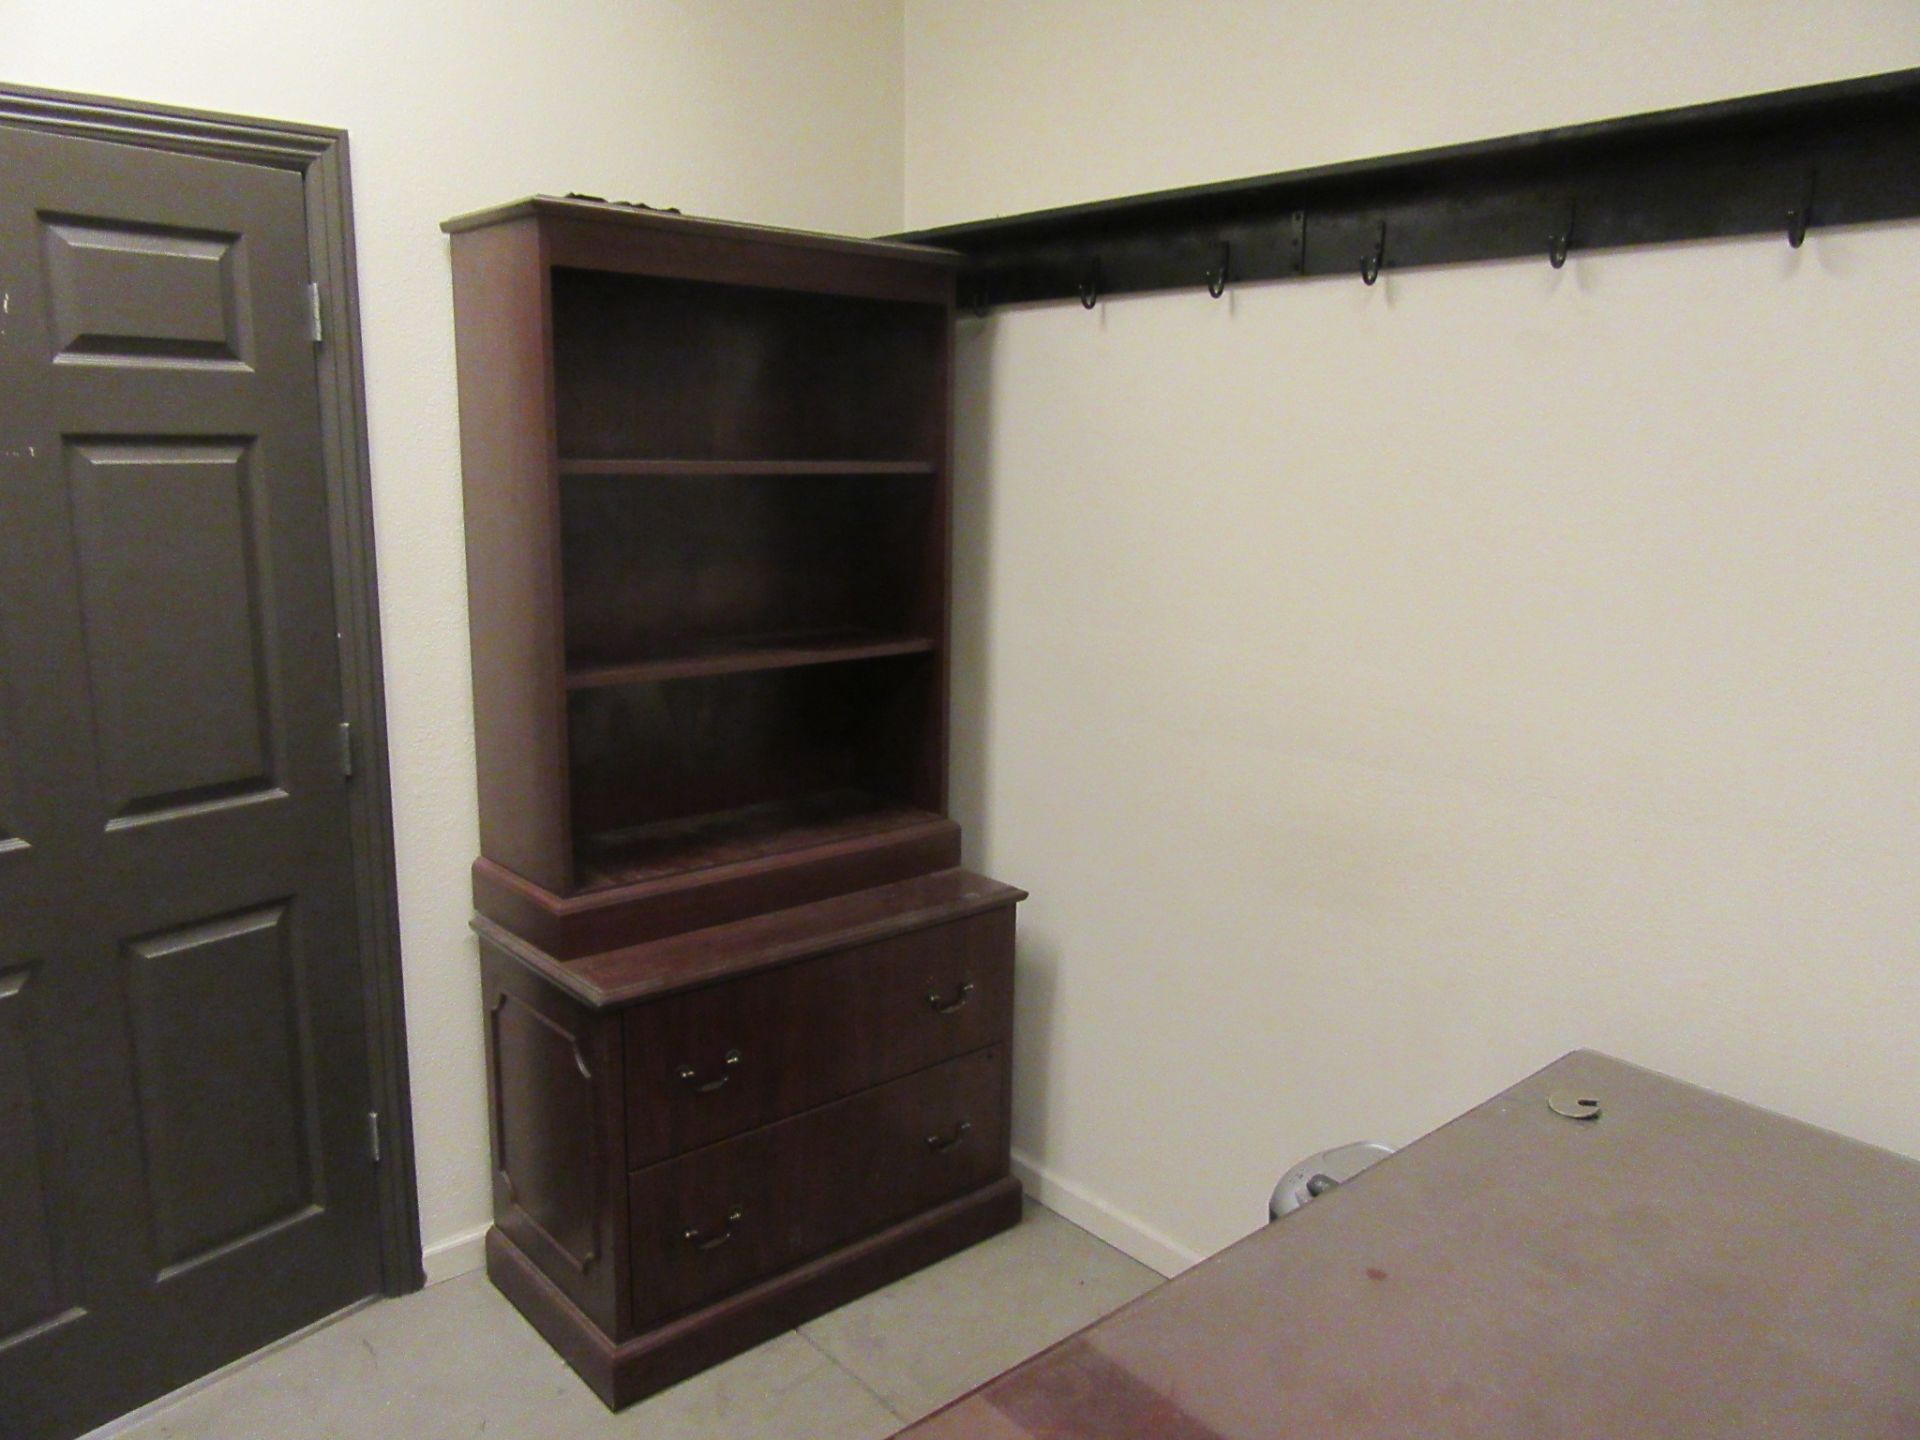 WOOD DESK, CHAIR, 2 DRAWER LATERAL FILE, BOOKCASE, (3) 4 DRAWER FILE CABINETS AND PICTURE FRAME - Image 2 of 3